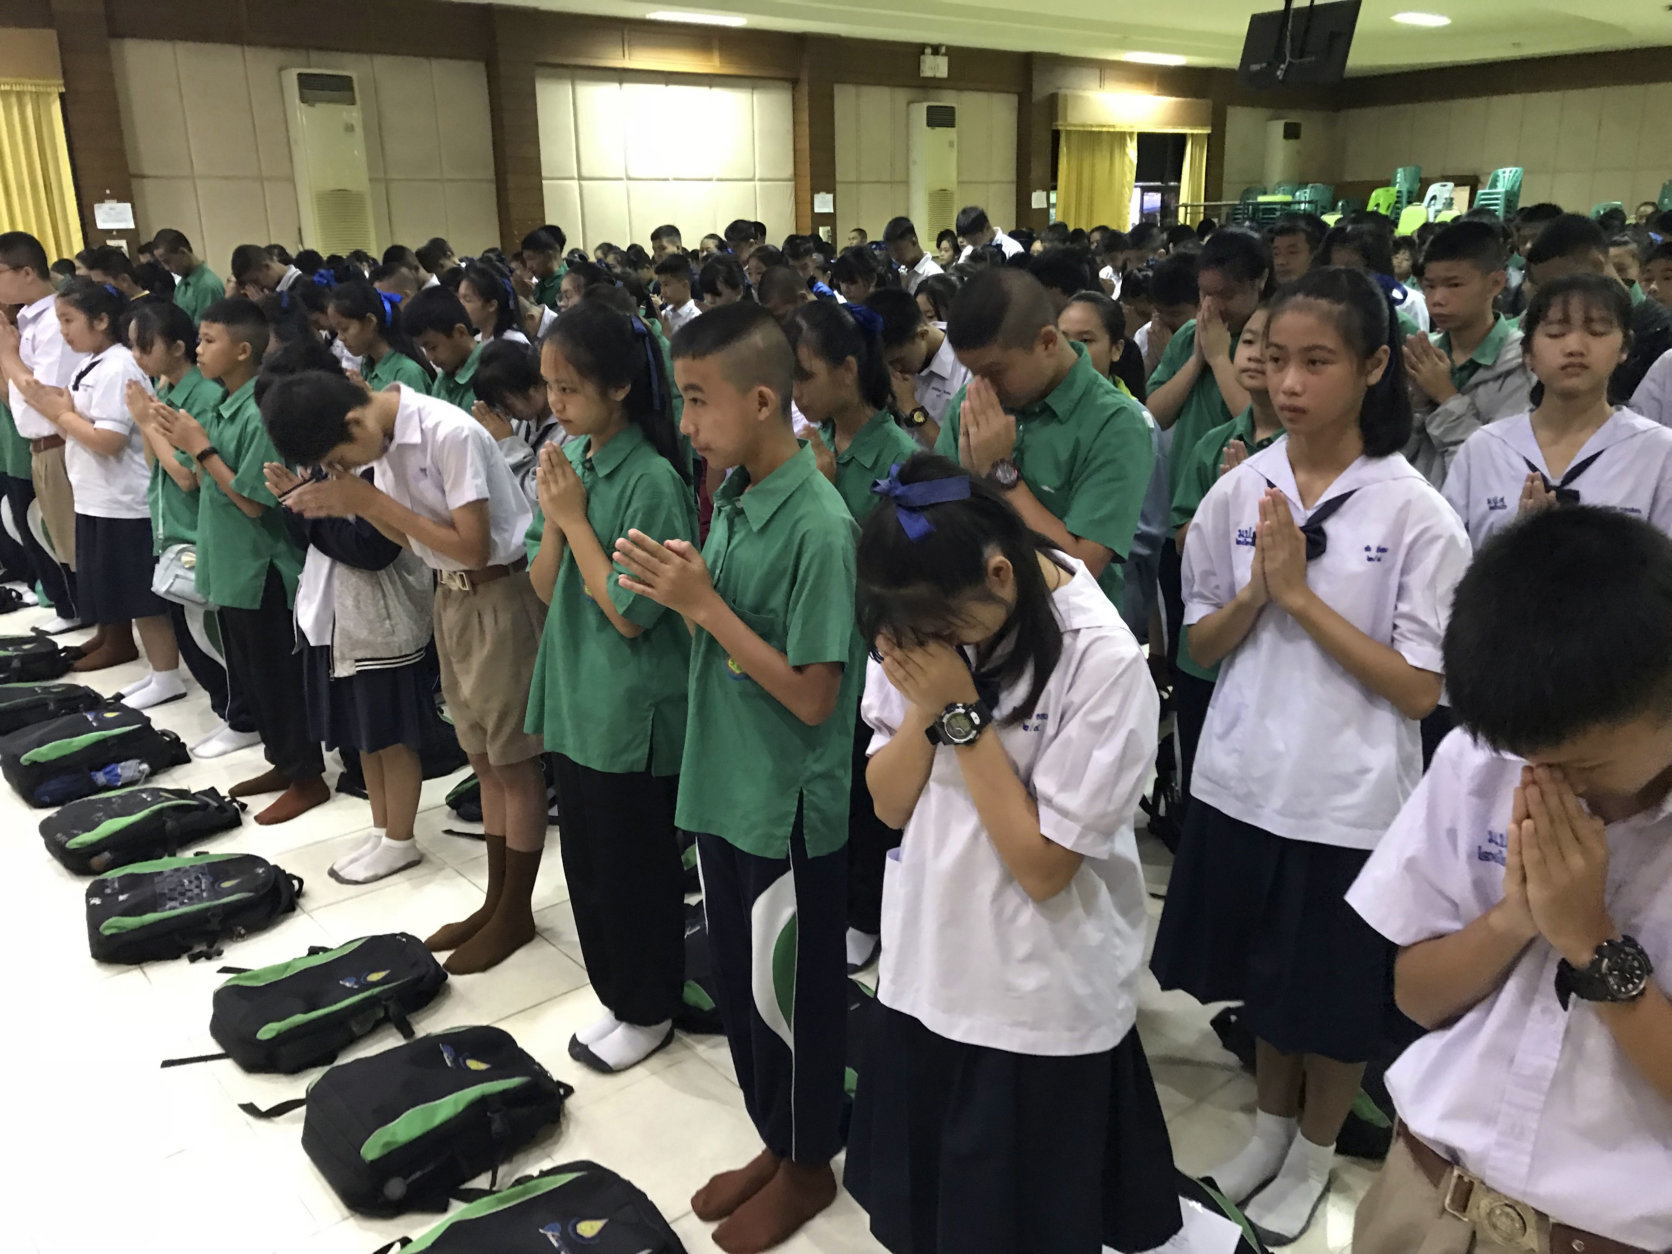 Students pray at Maesaiprasitsart school where six out of the rescued 12 boys study as they cheer the successful rescue in the Mae Sai district in Chiang Rai province, northern Thailand, Wednesday, July 11, 2018. A daring rescue mission in the treacherous confines of a flooded cave in northern Thailand has saved all 12 boys and their soccer coach who were trapped deep within the labyrinth, ending a grueling 18-day ordeal that claimed the life of an experienced volunteer diver and riveted people around the world. (AP Photo/Johnson Lai)